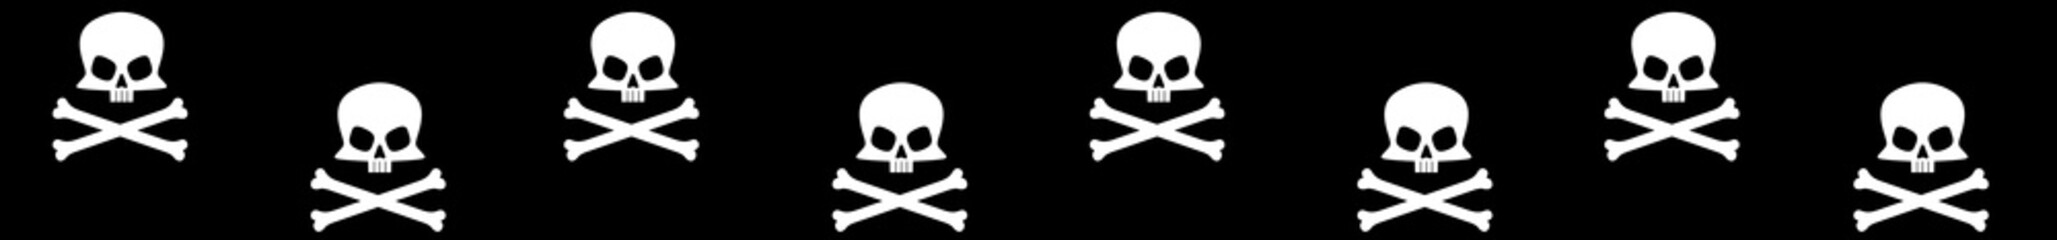 Long web seamless banner with skull and crossbones icon on black background. Vector illustration.